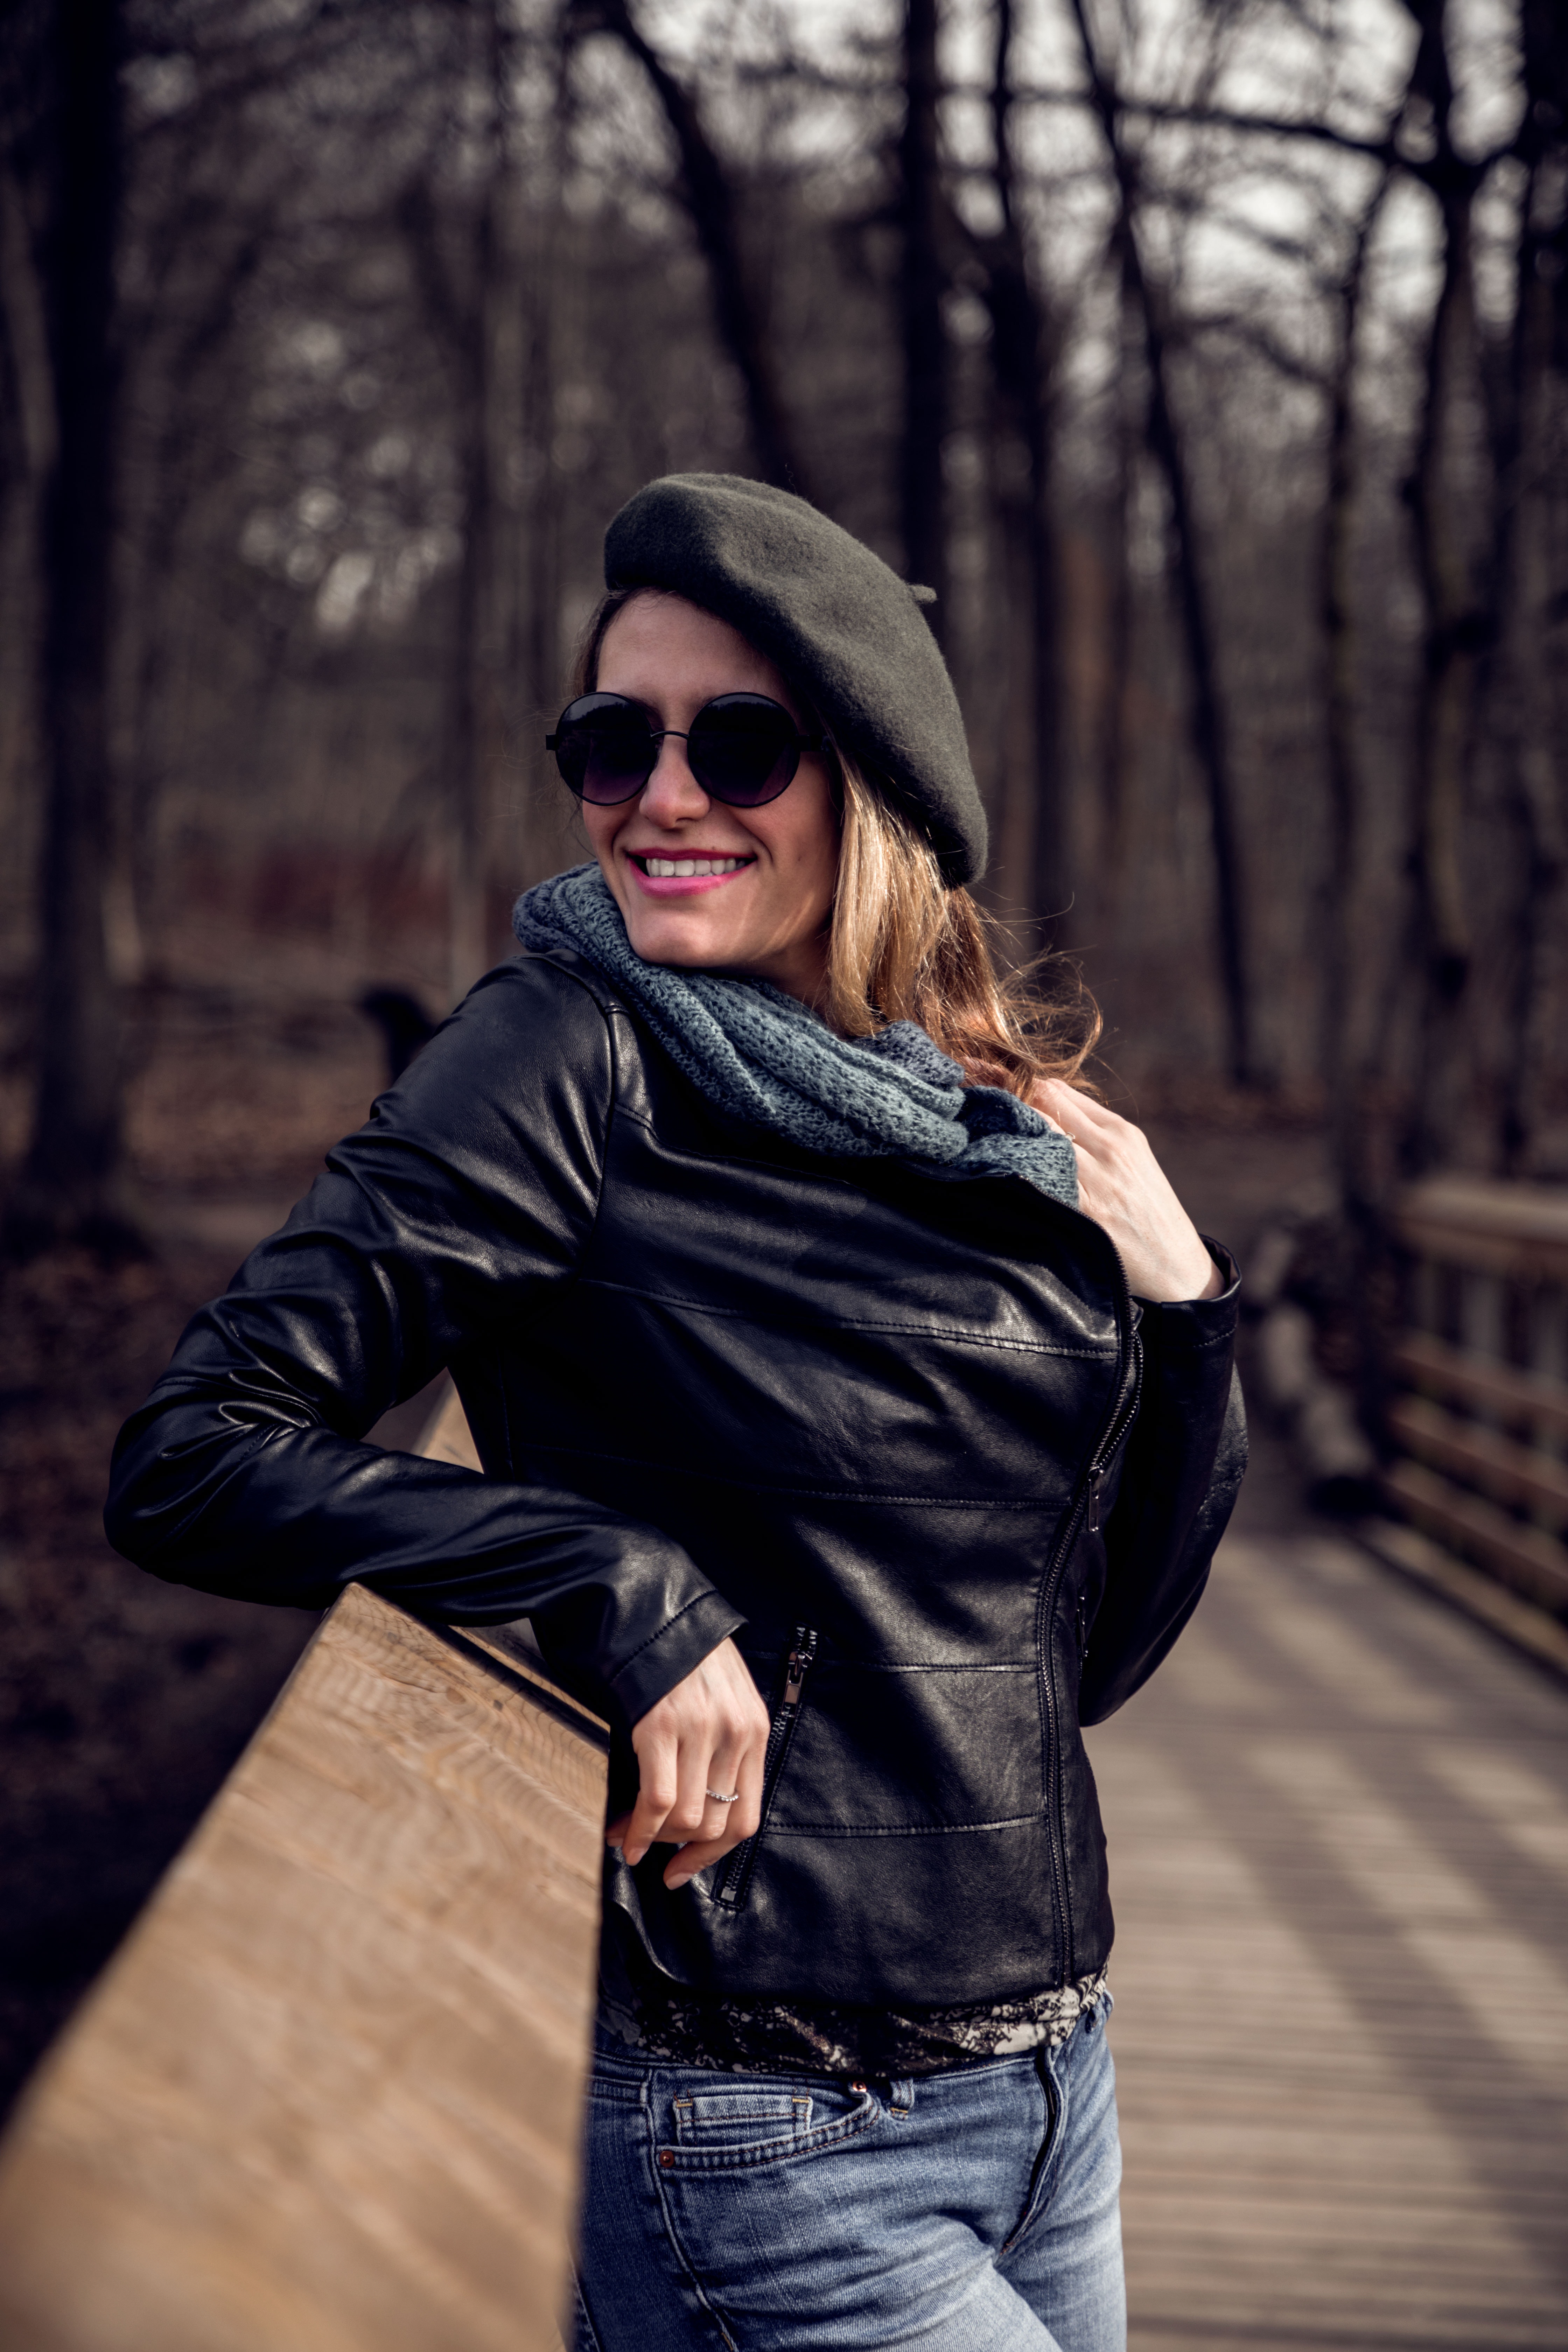 Fashion Tips to Look Stylish when Covered in Layers